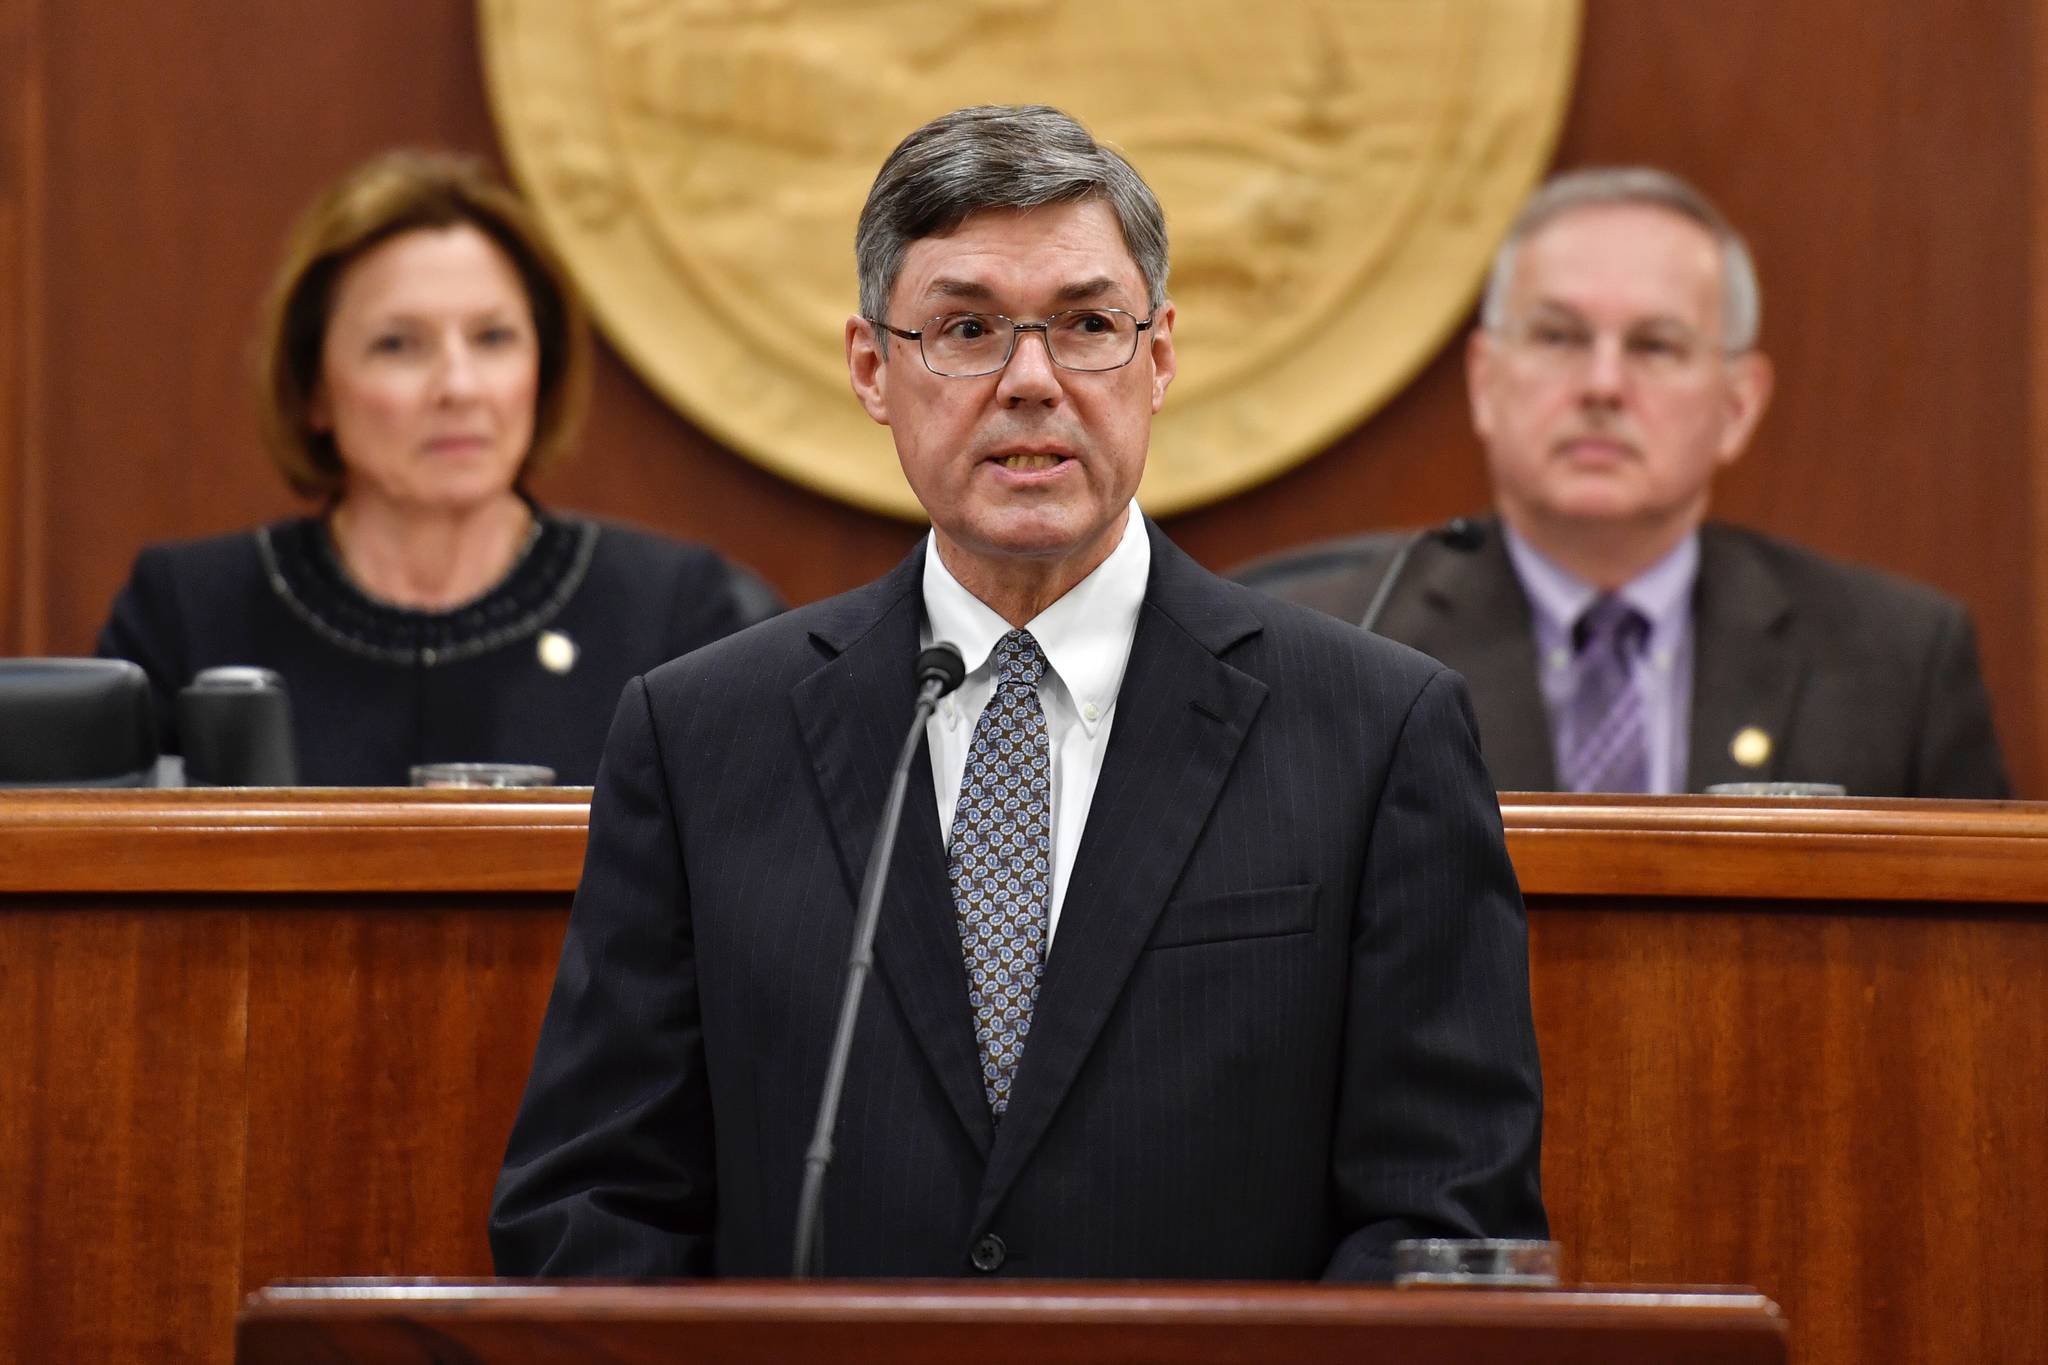 Alaska Supreme Court Chief Justice Joel H. Bolger speaks to a Joint Session of the Alaska Legislature at the Capitol on Wednesday, Feb. 19, 2019. Senate President Cathy Giessel, R-Anchorage, and Speaker of the House Bryce Edgmon, D-Dillingham, listen from the Speaker’s desk in the House of Representatives. (Michael Penn | Juneau Empire)